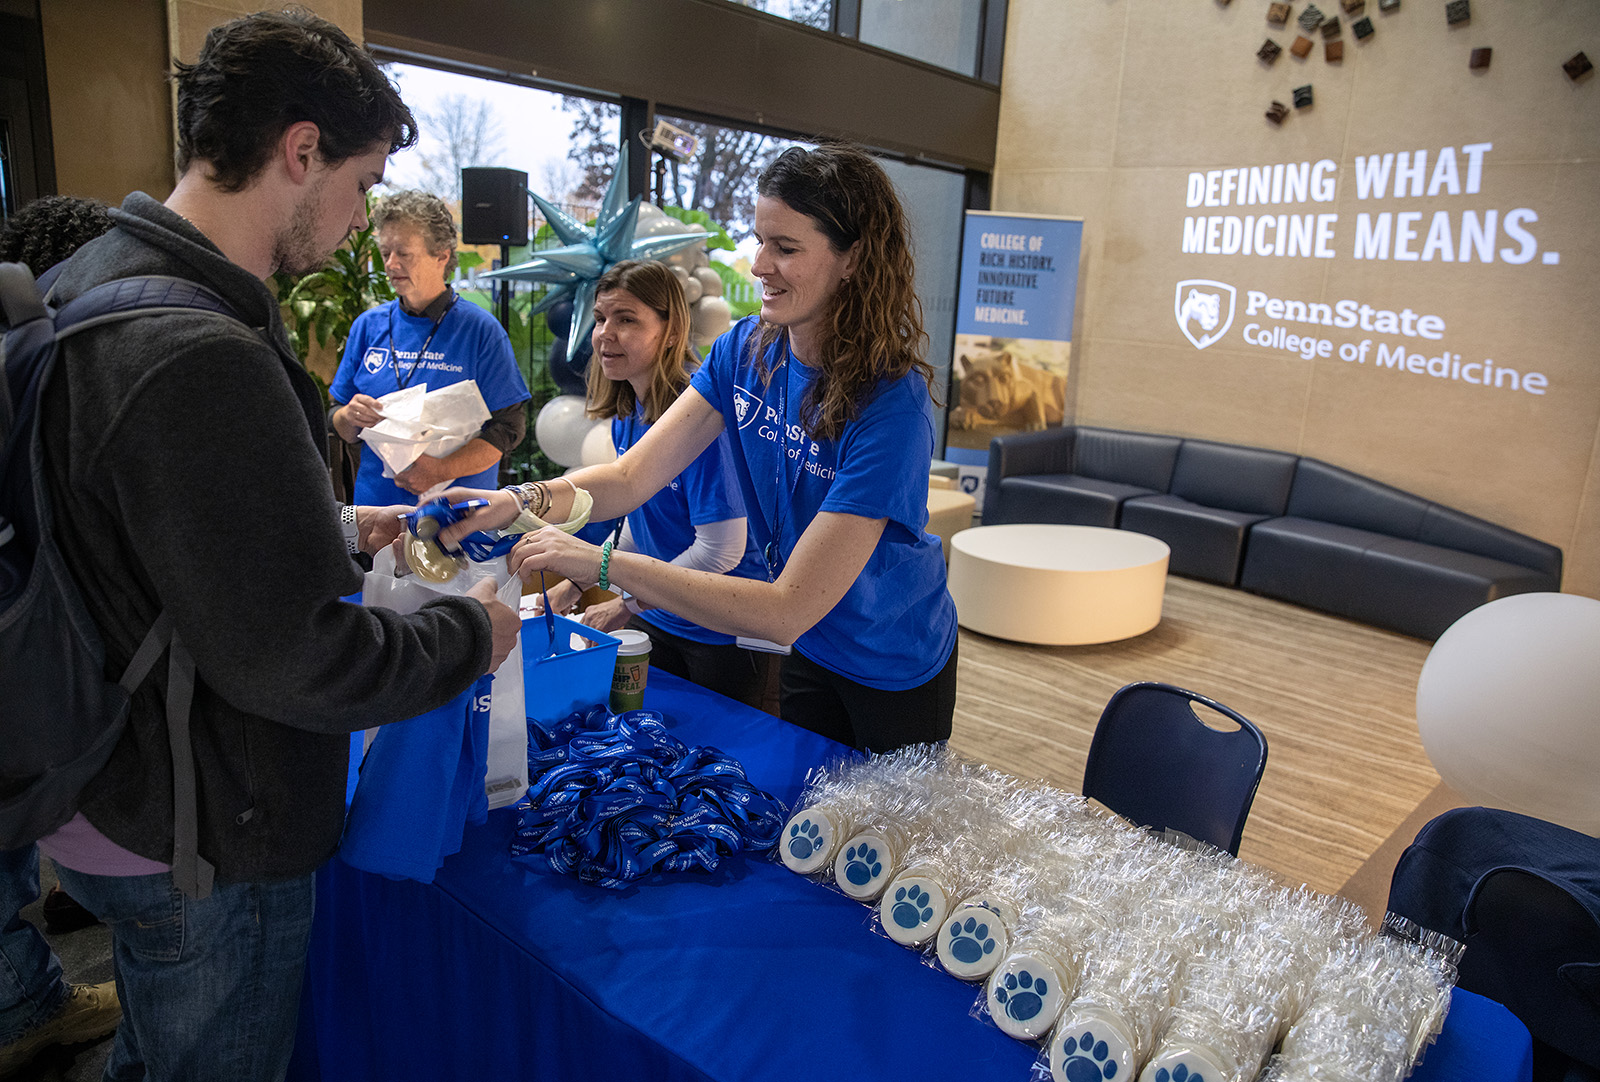 Three people wearing Penn State College of Medicine shirts stand behind a table, handing out items to two people on the other side of the table; there are balloons in the background and Defining What Medicine Means projected on a wall.